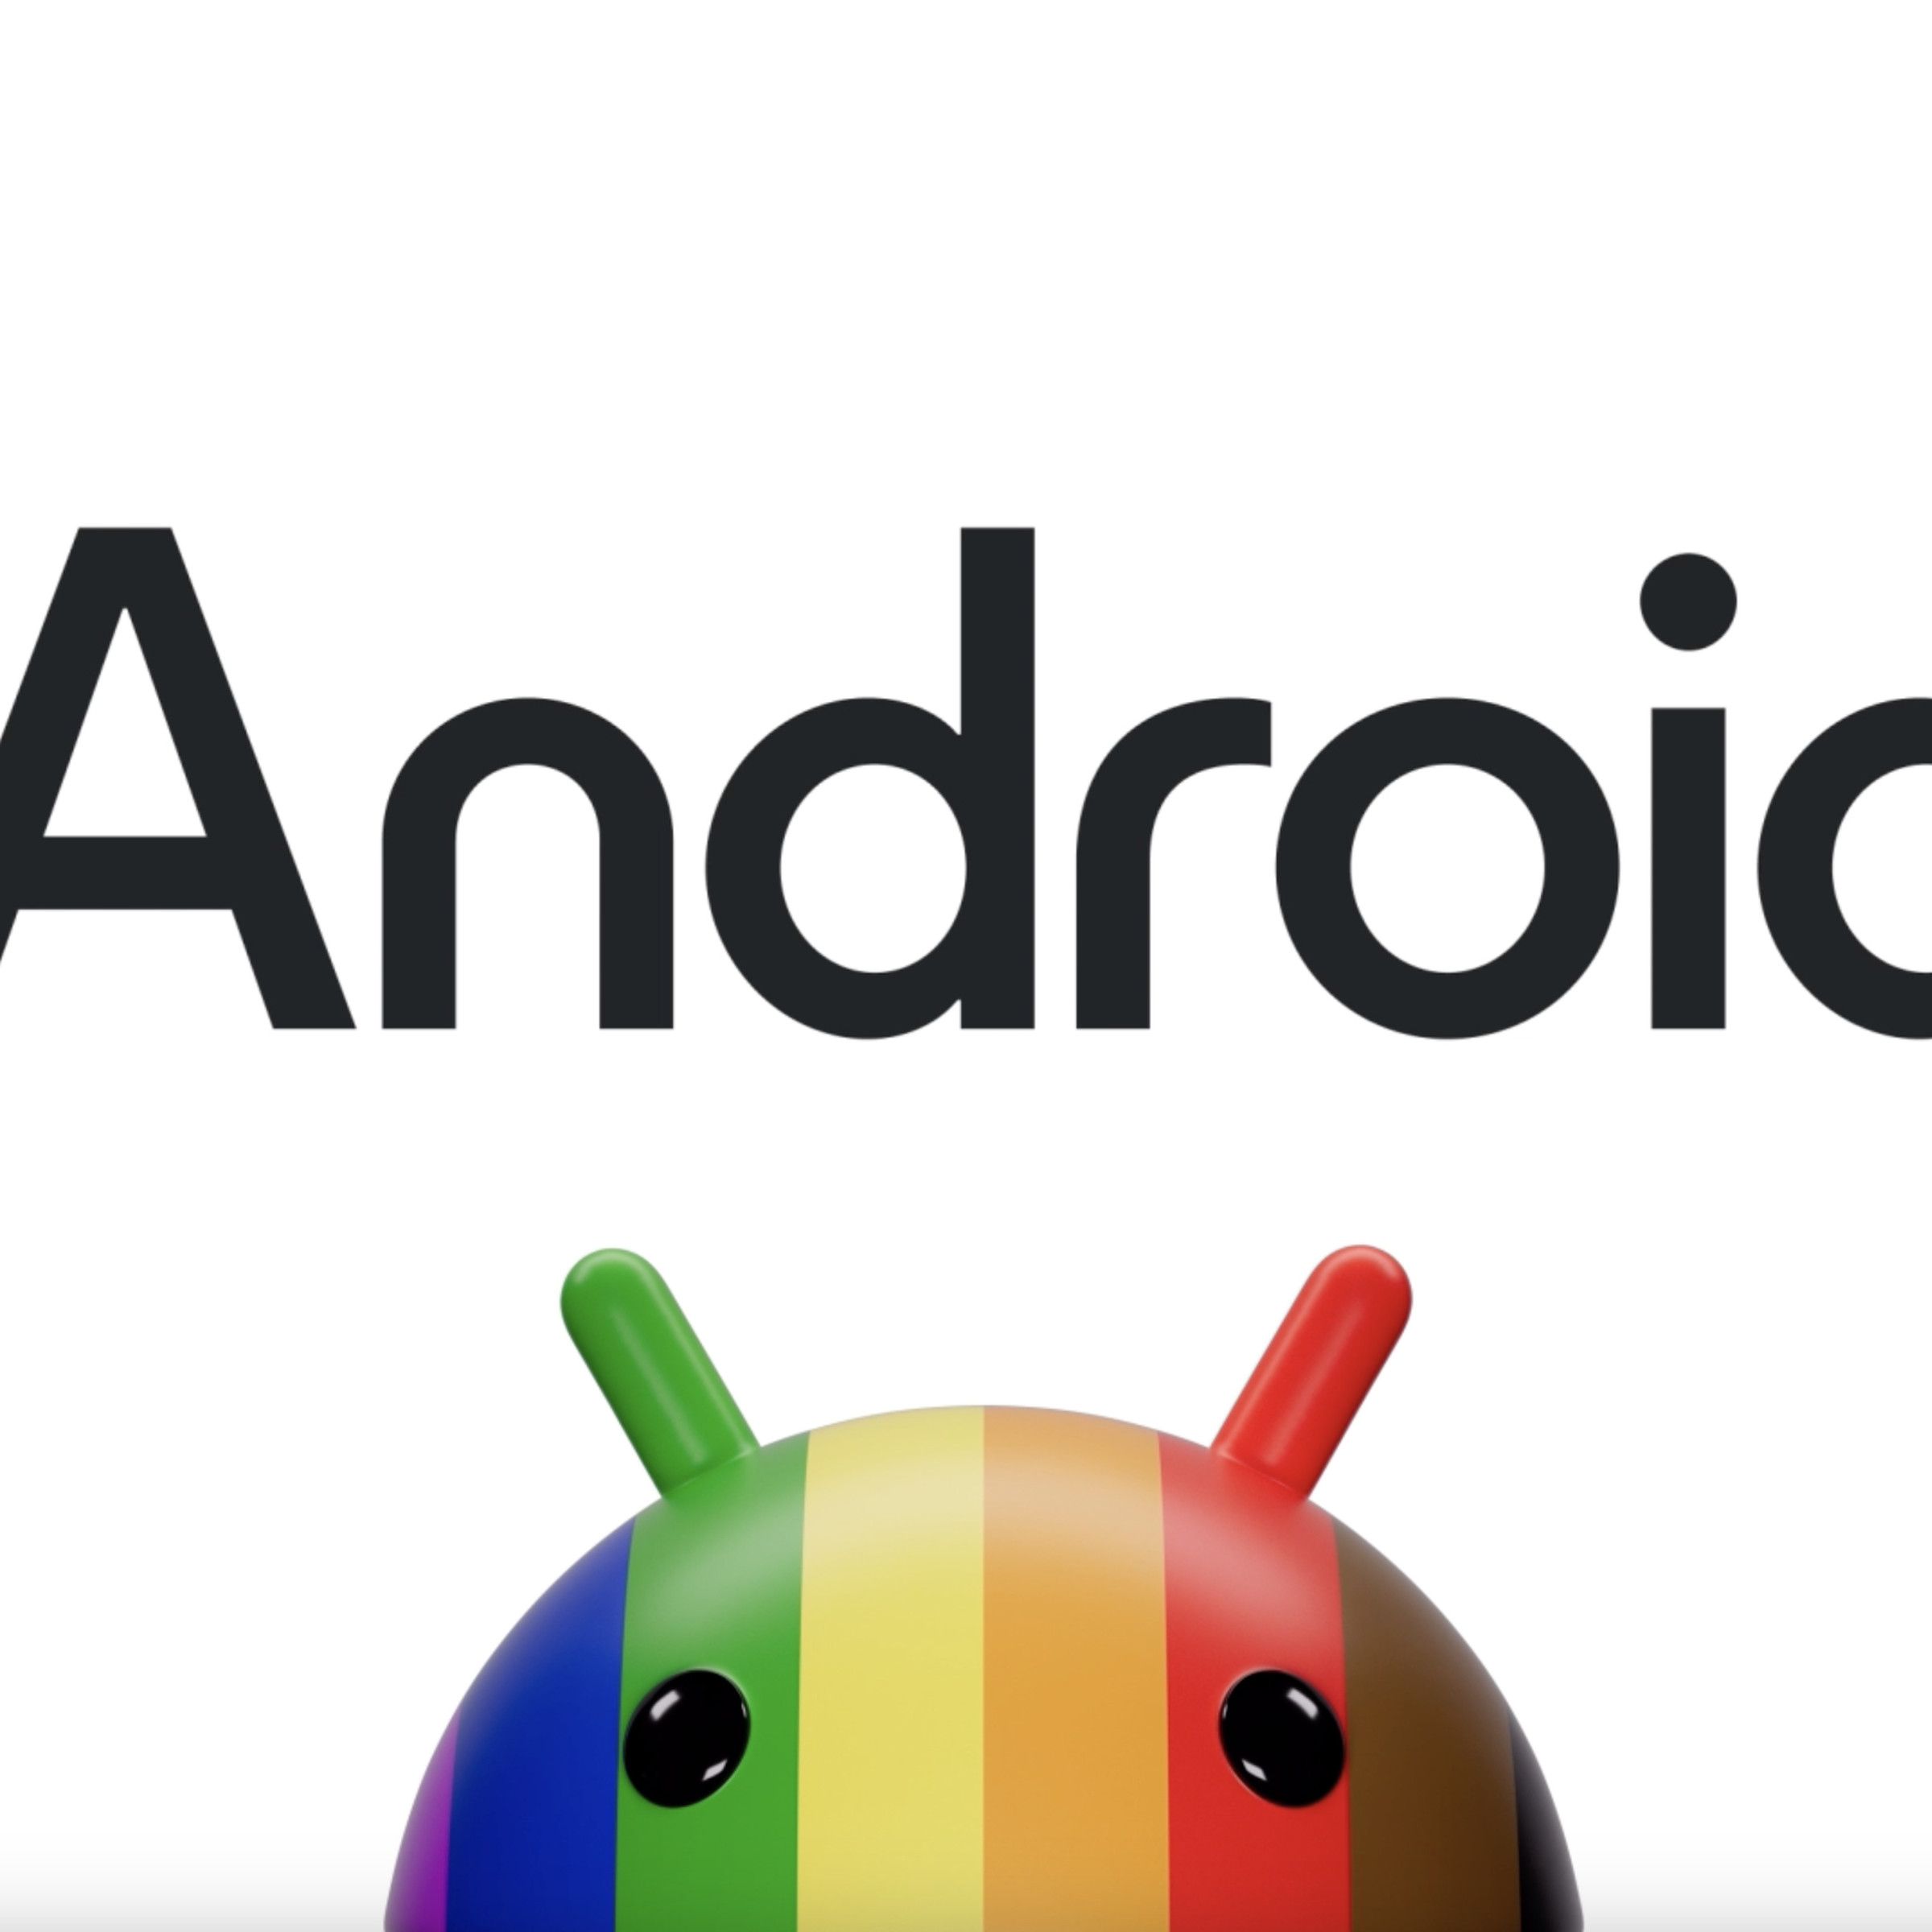 New Android logo with a capital A and droid rendered in 3D with rainbow stripes.